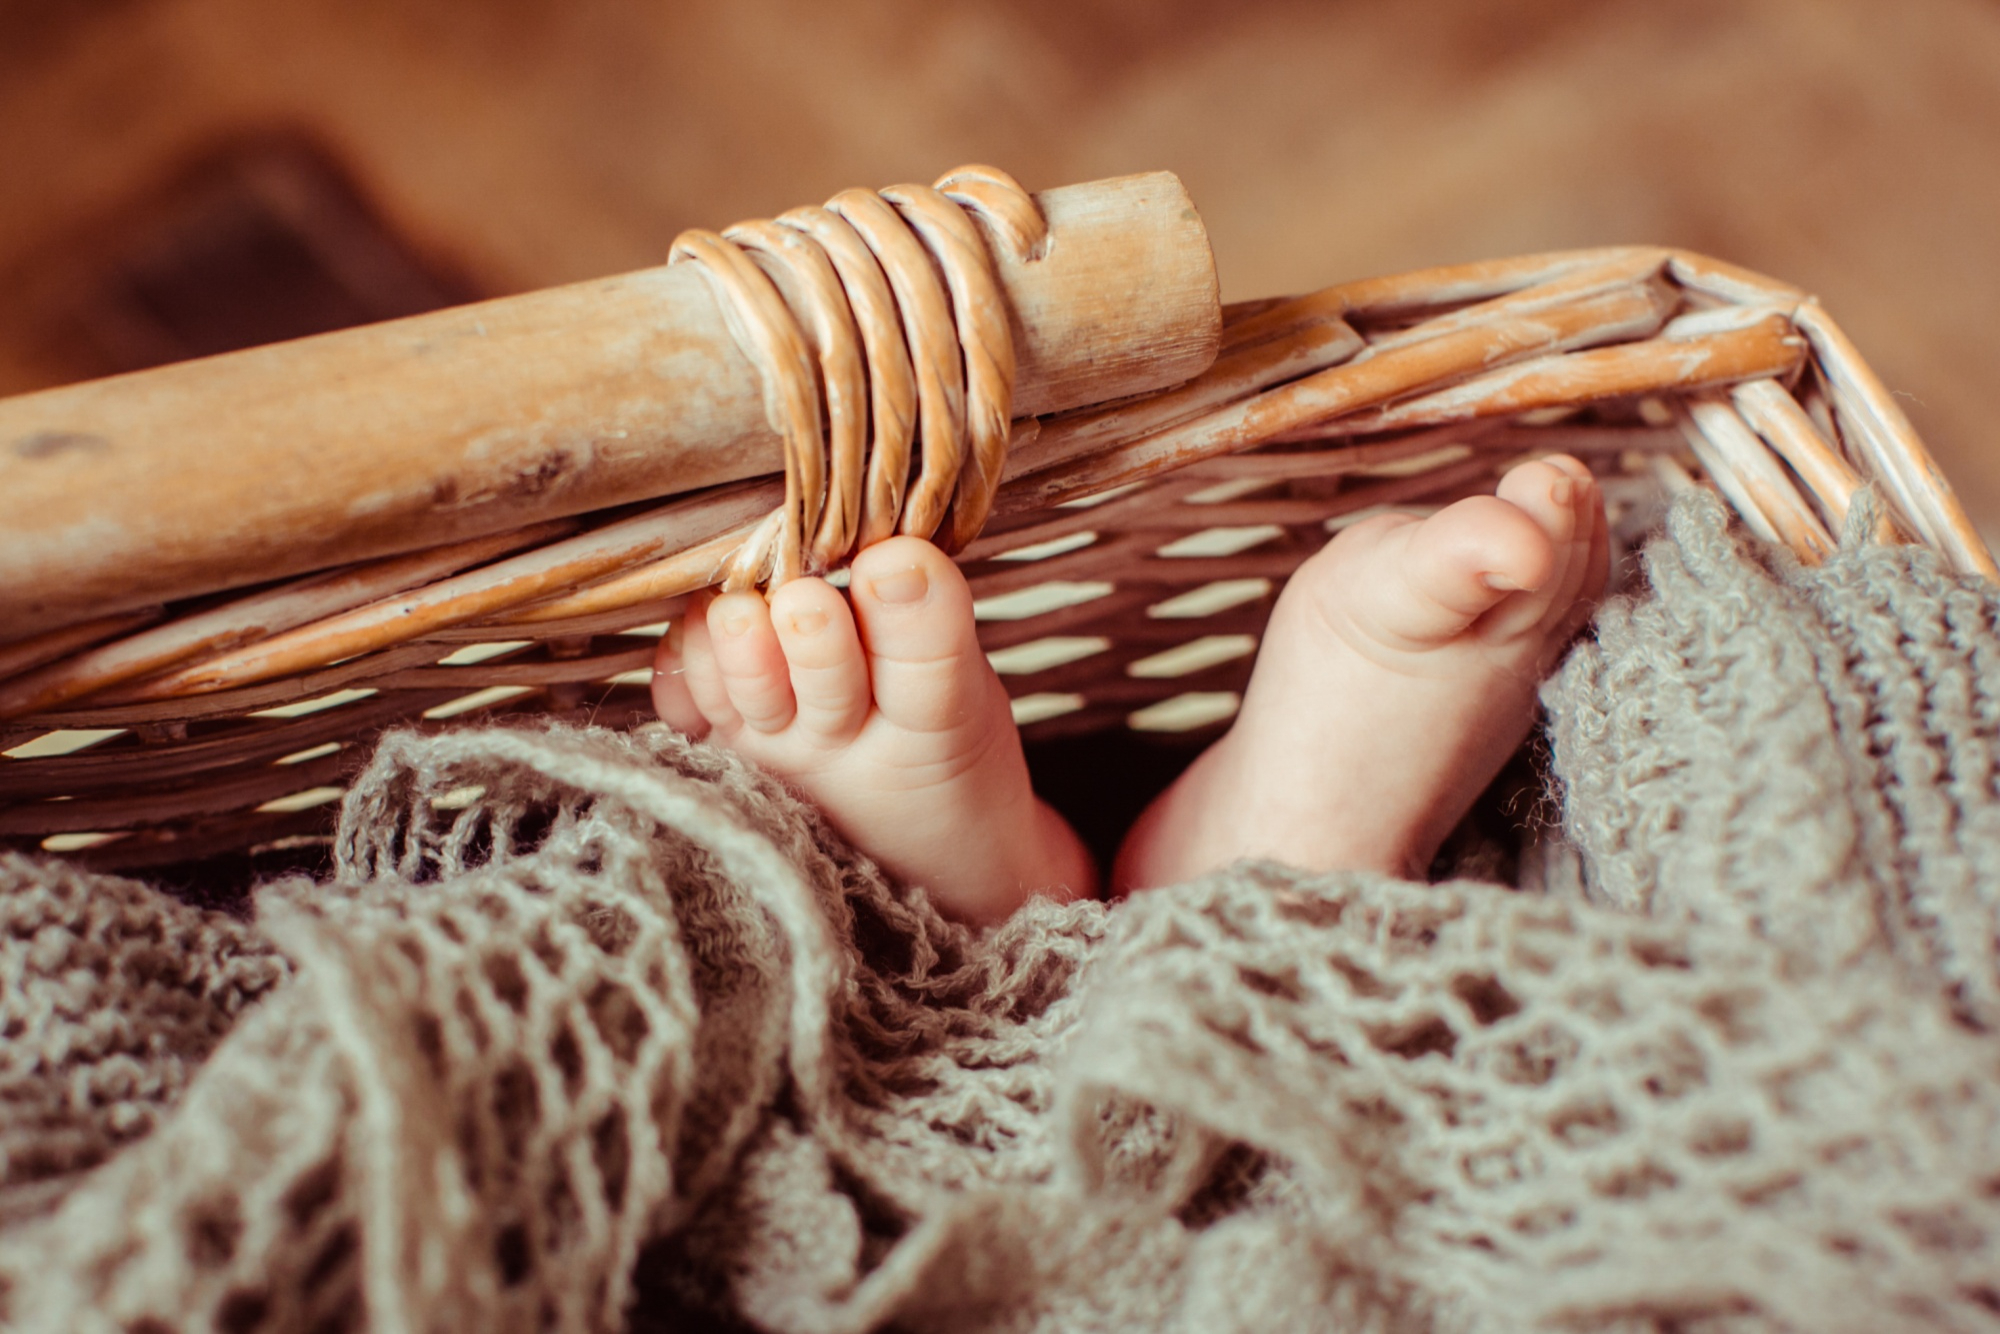 The feet of a baby lying in a basket | Source: Freepik